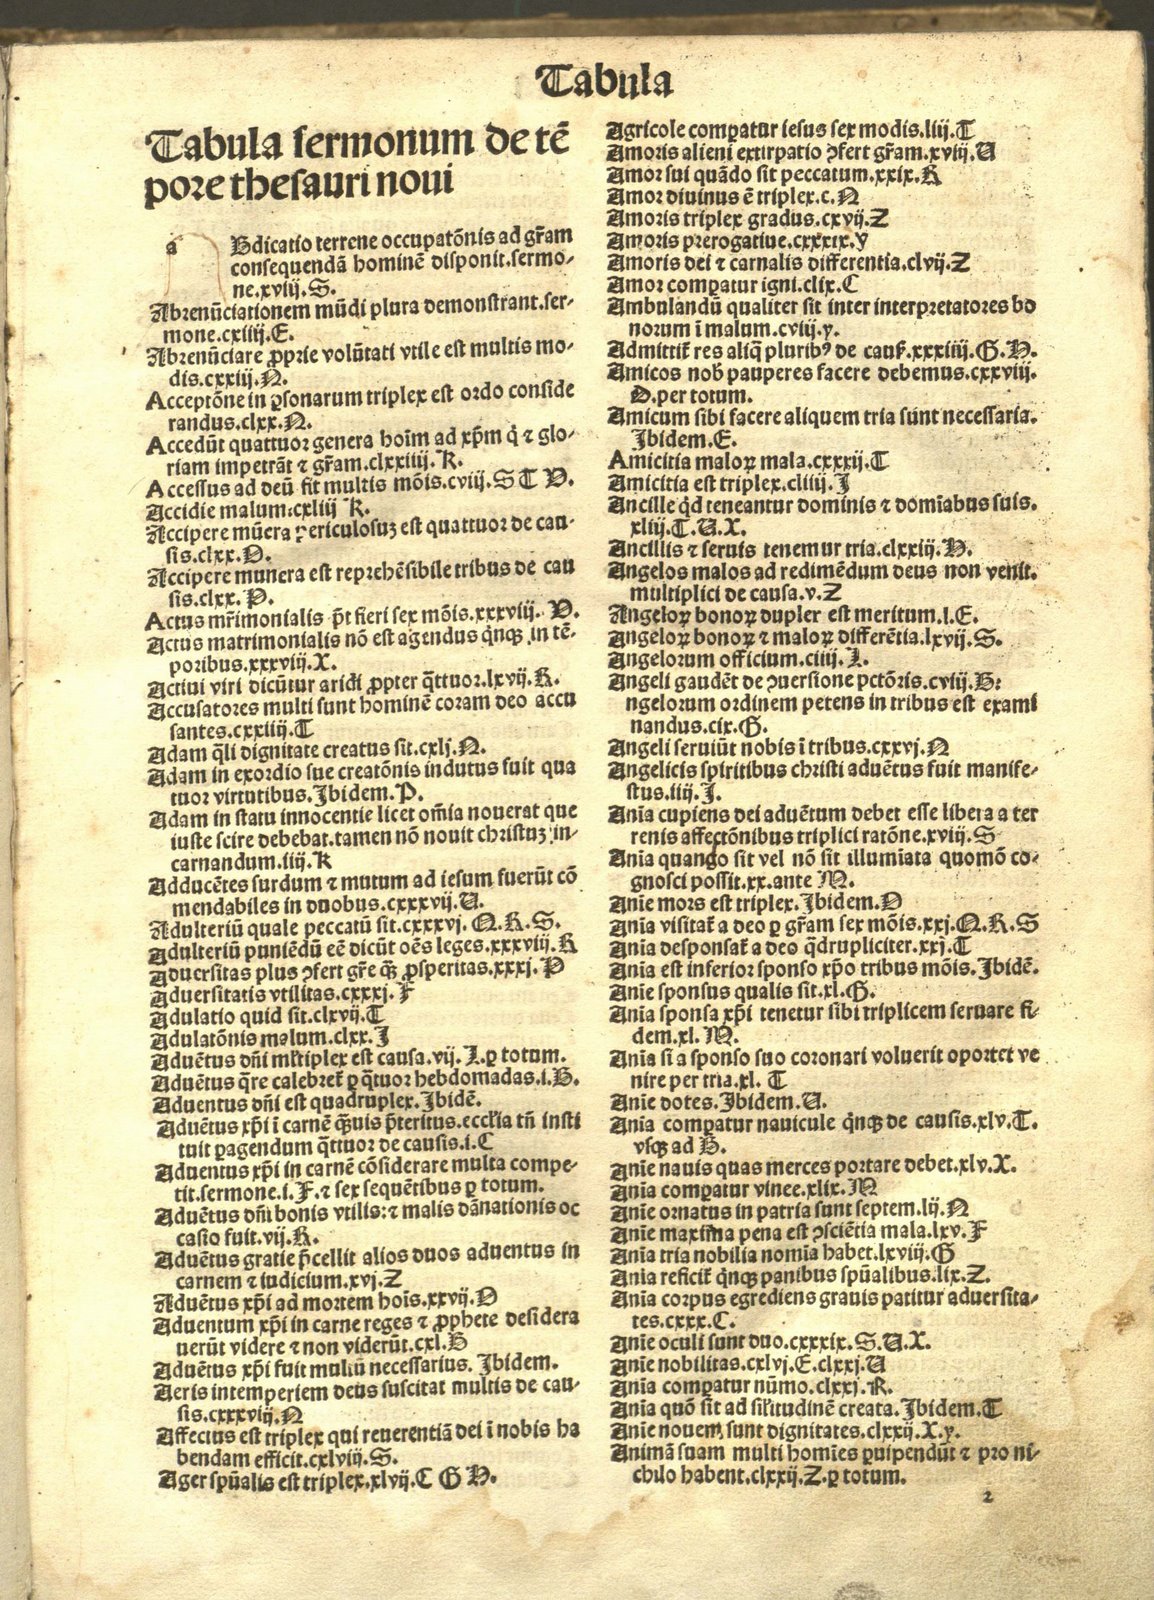 Table of Contents for Sermones Thesauri Novi de Tempore by Jerusalem's Peter Paludanus, published in 1496